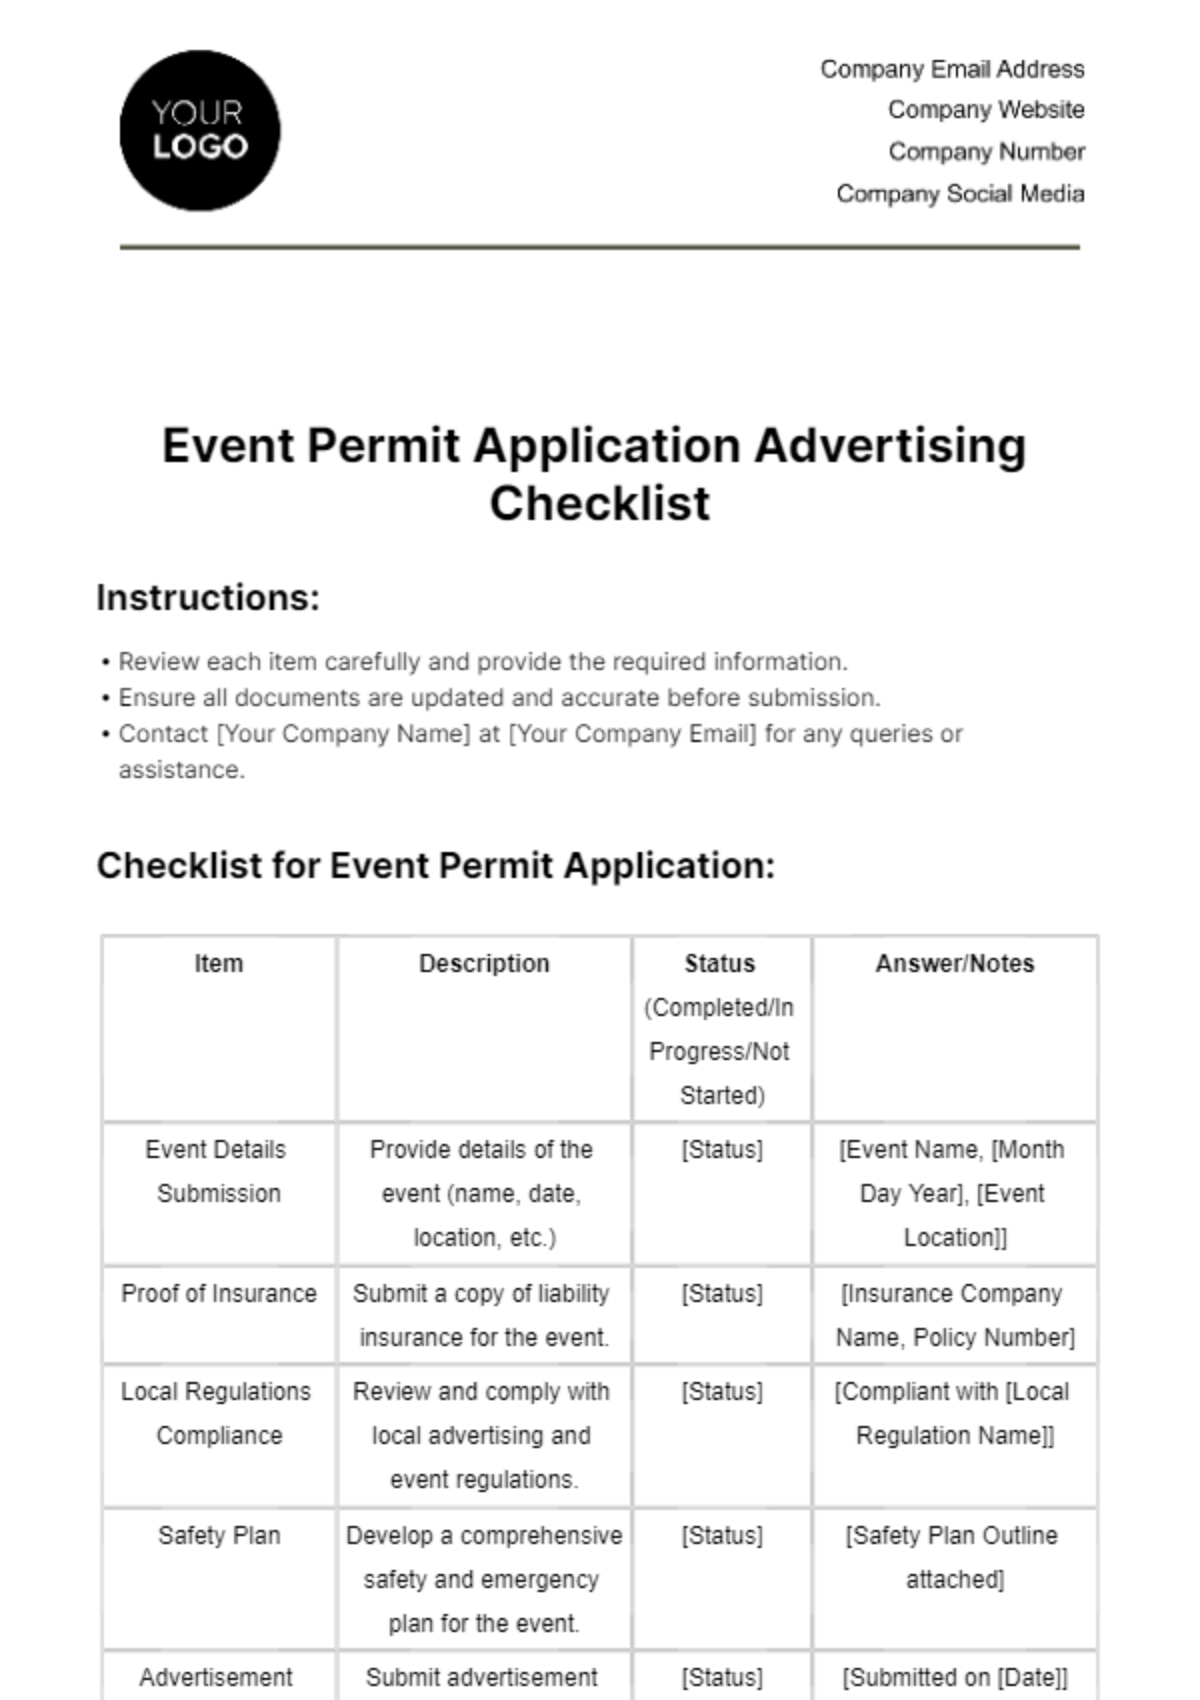 Free Event Permit Application Advertising Checklist Template